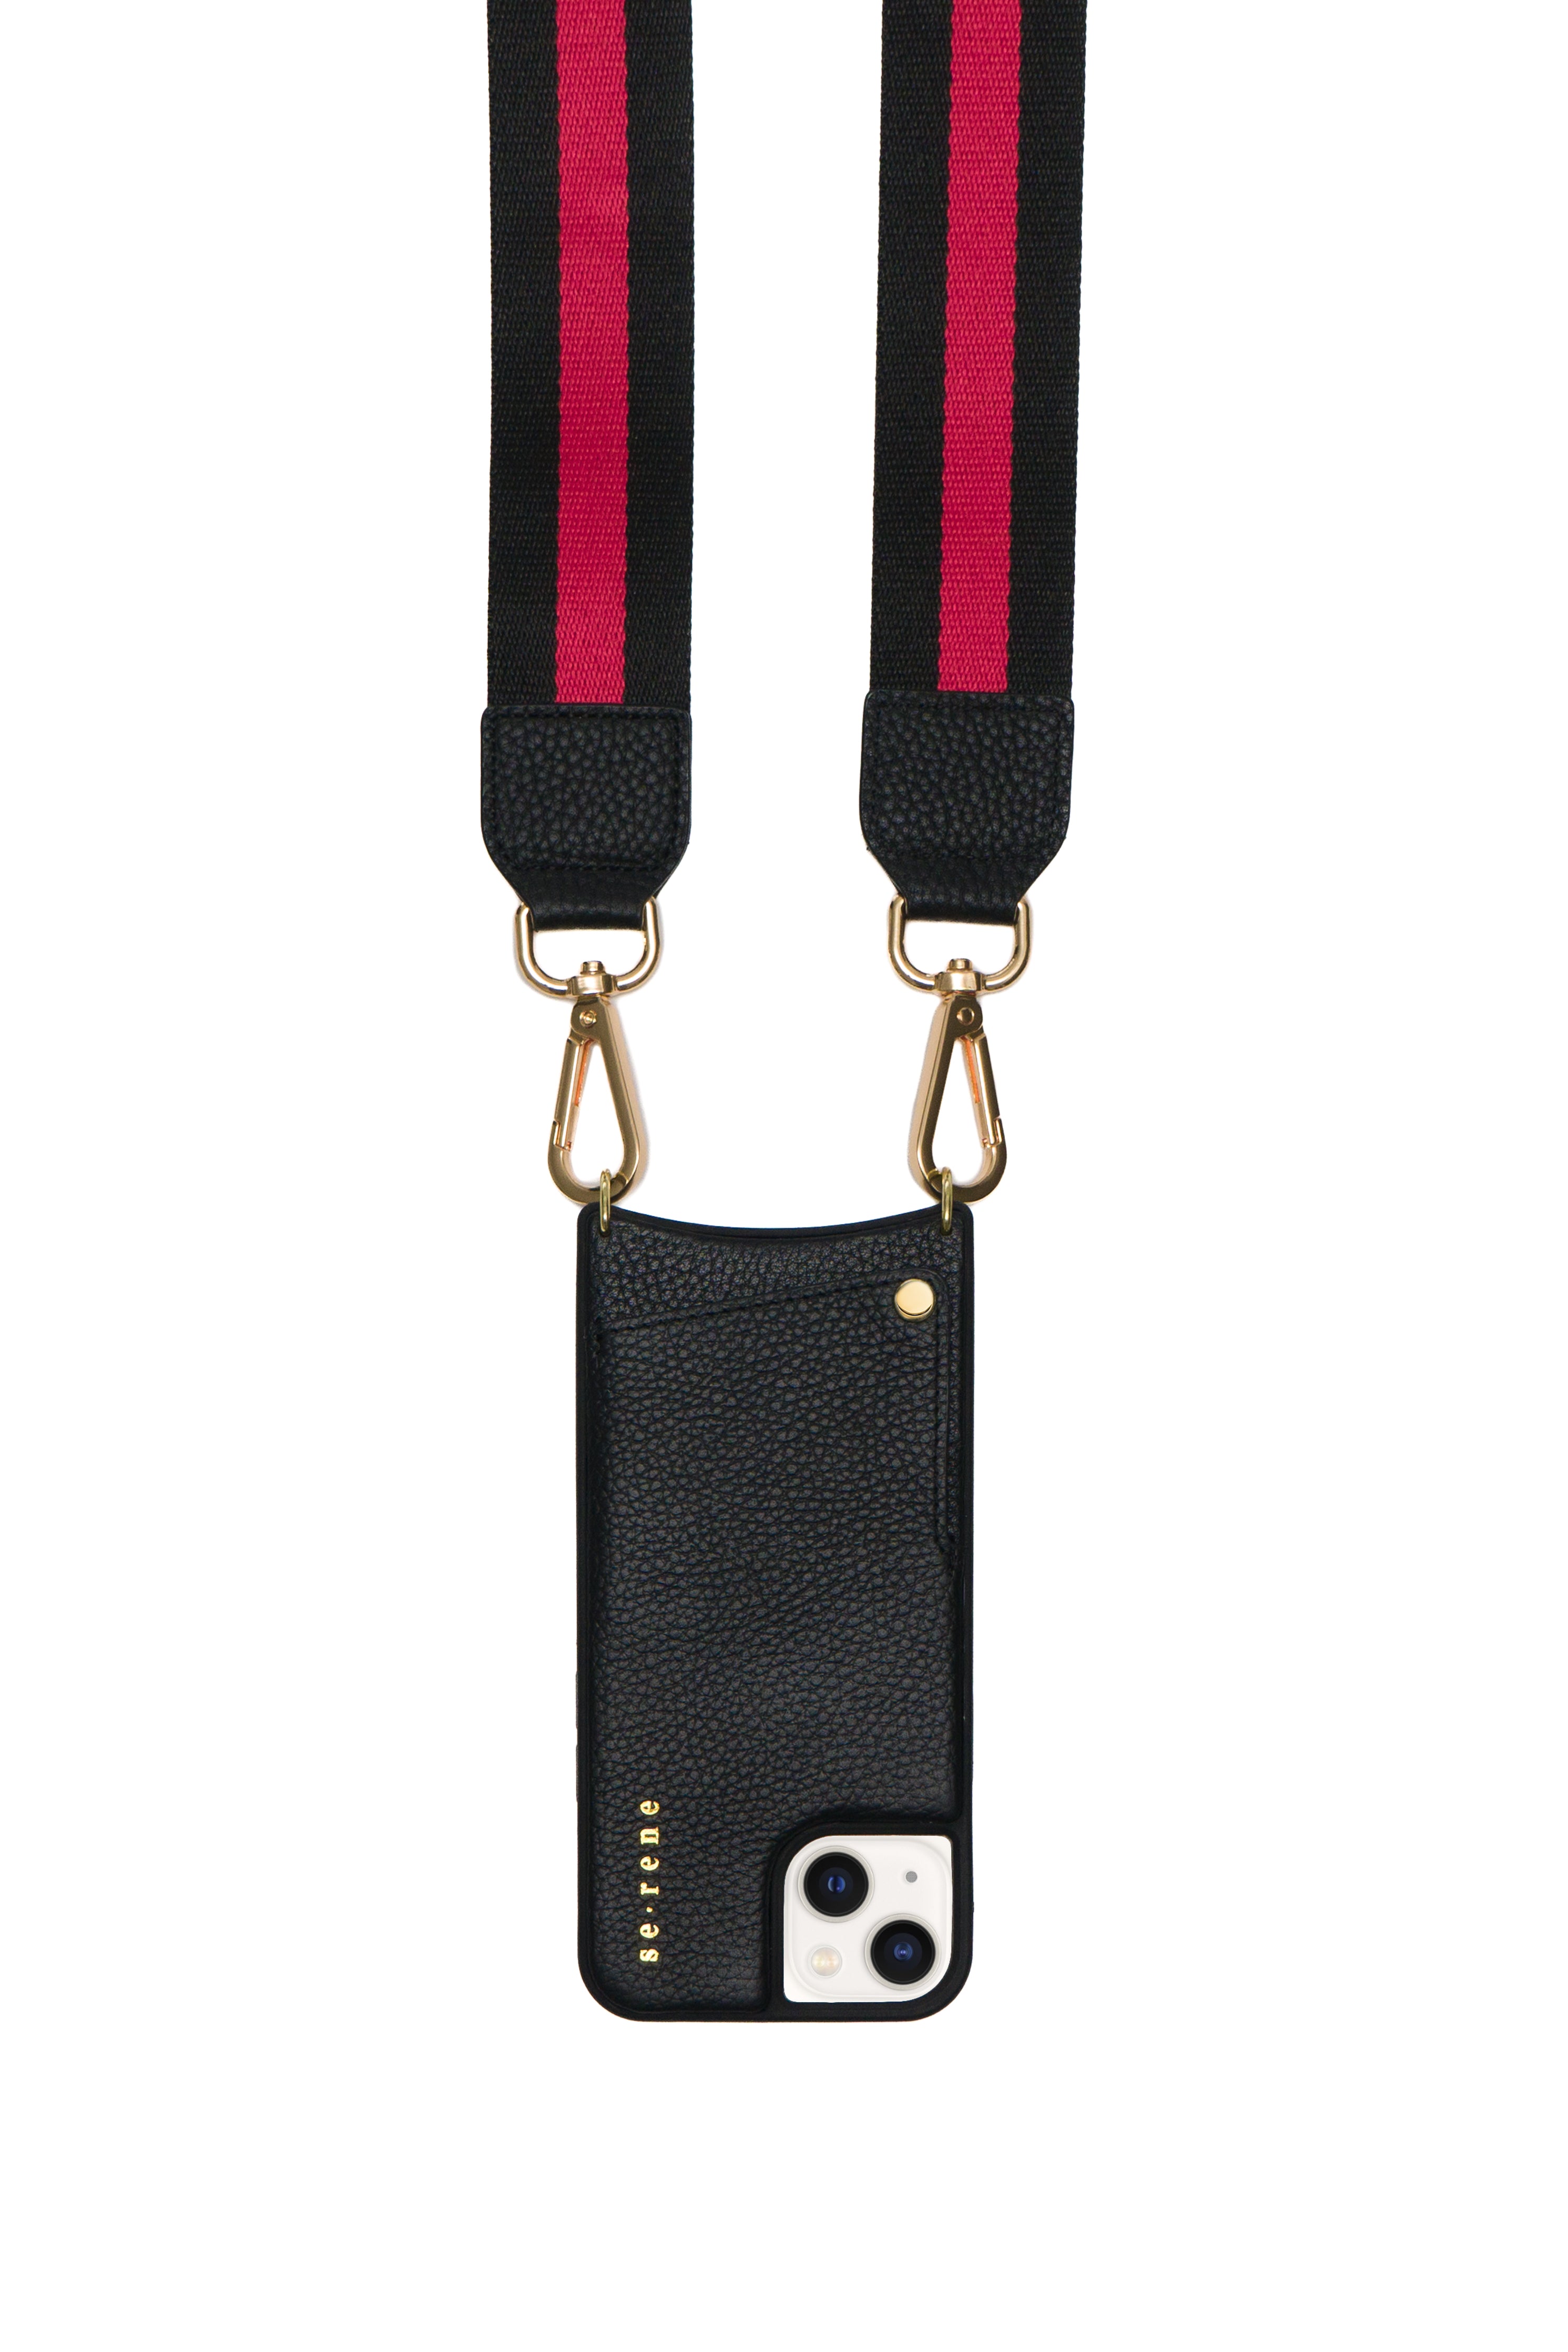 SE.RENE / Everyday Cover with Red & Black Strap – Se-rene Retail